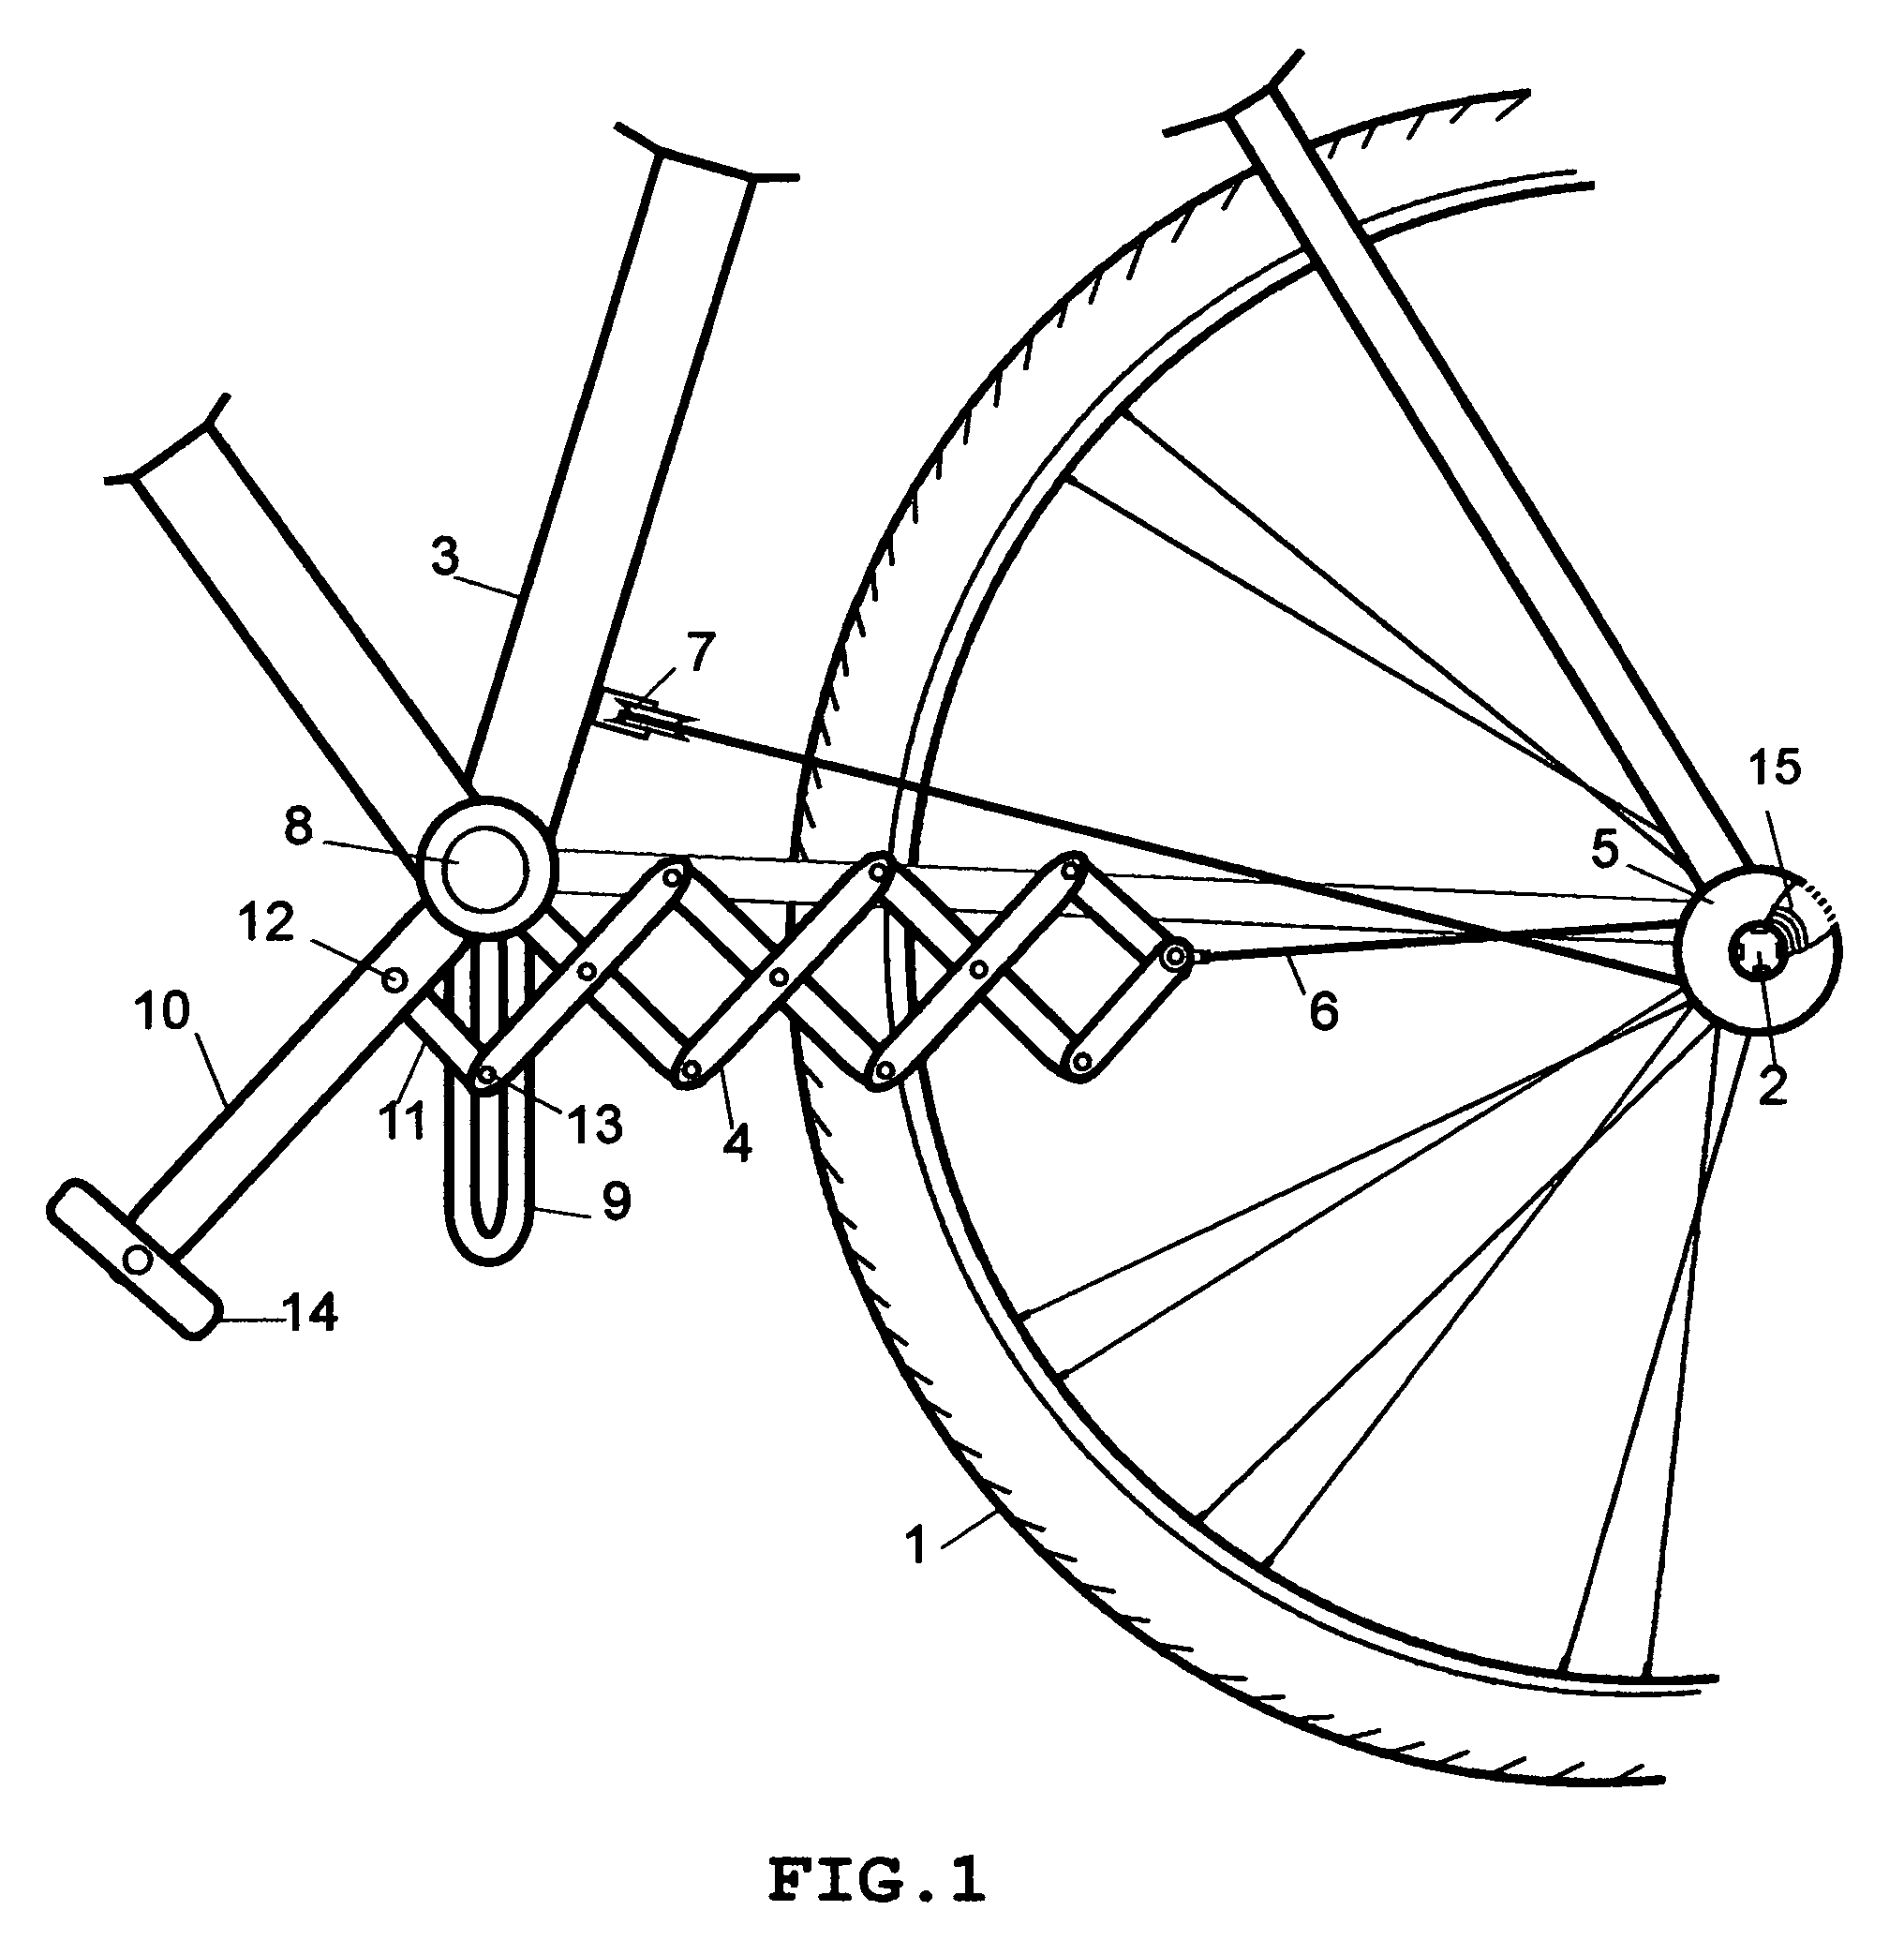 Power pedal for a bicycle